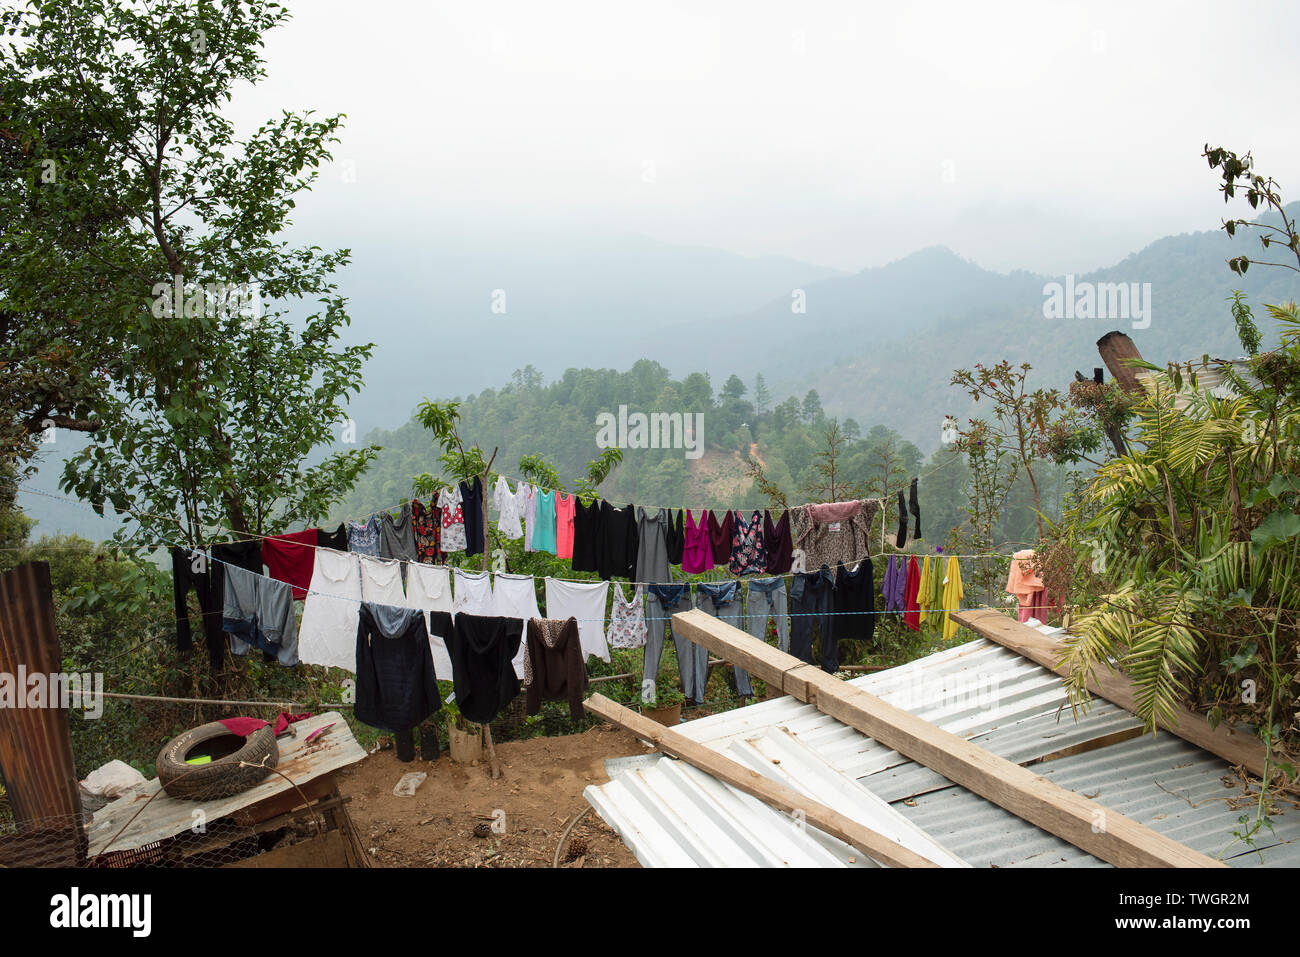 Clothes are drying on the ropes in scenic nature settings. Rural living in the mountain village of San José del Pacífico, Oaxaca, Mexico. May 2019 Stock Photo